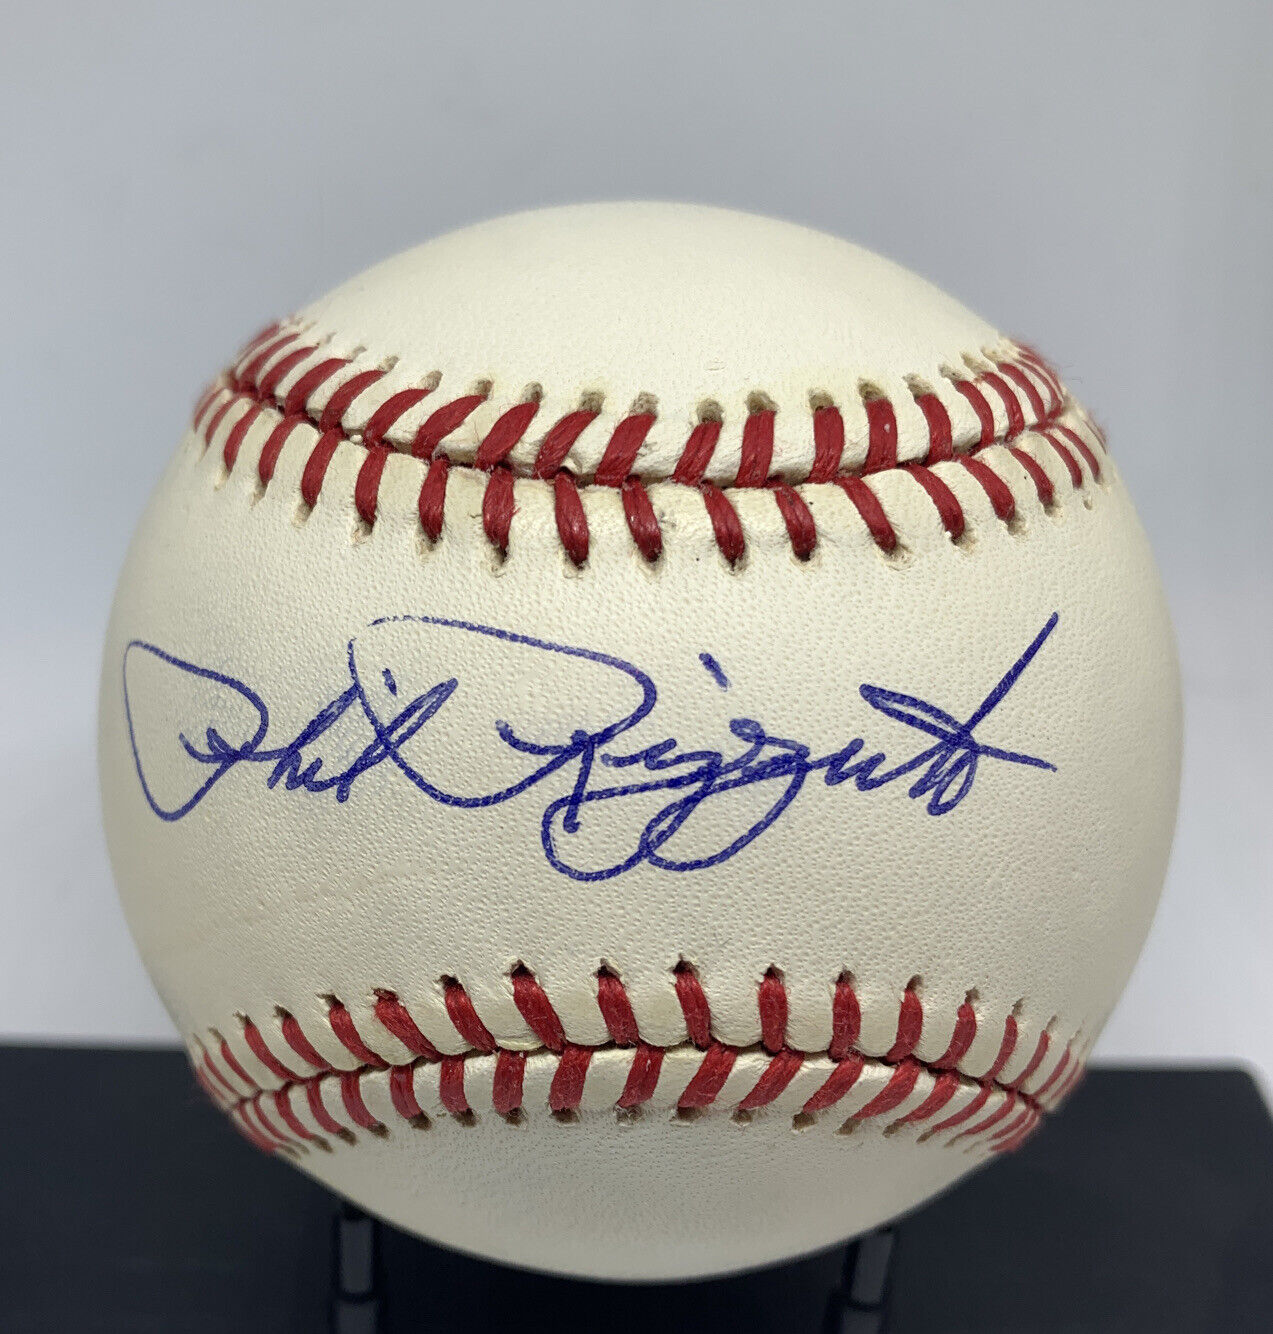 Yankees Phil Rizzuto Signed Autographed OAL Baseball HOF